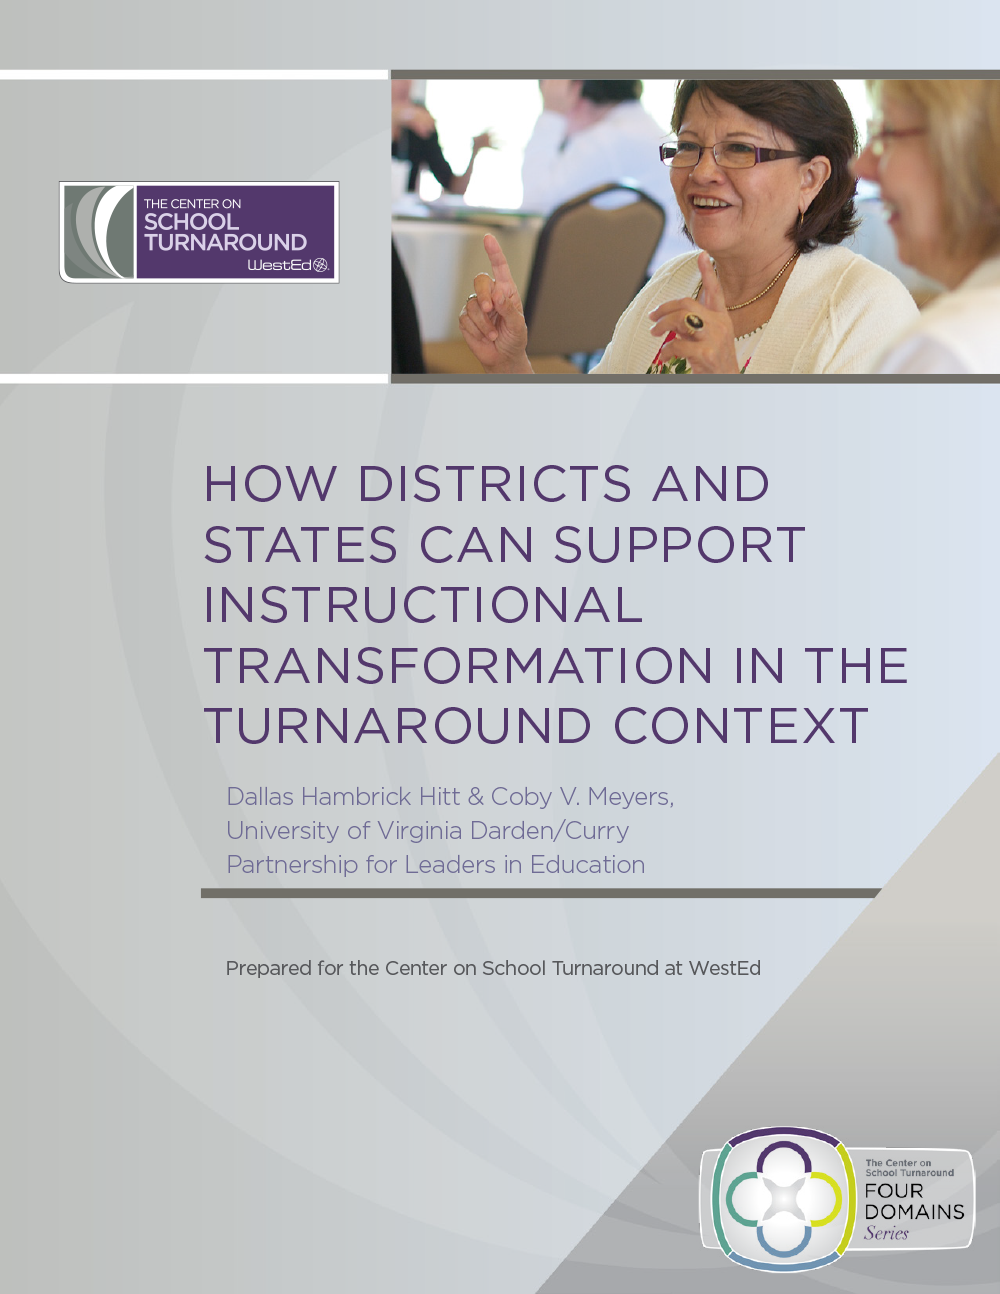 How Districts and States Can Support Instructional Transformation In the Turnaround Context